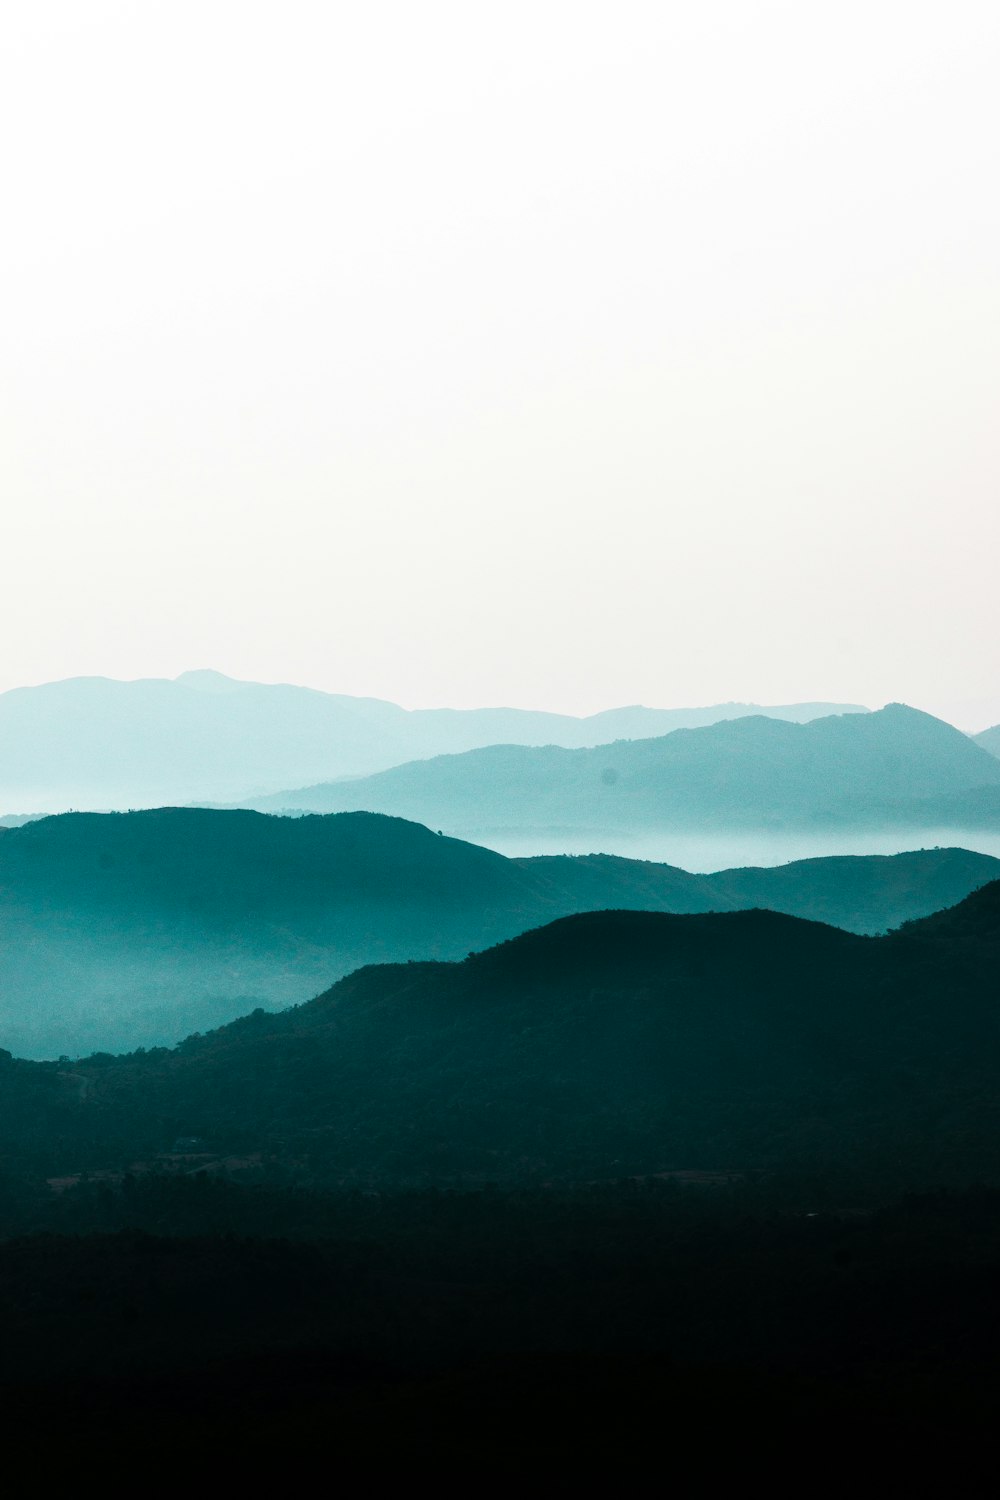 teal and black silhouette of hills